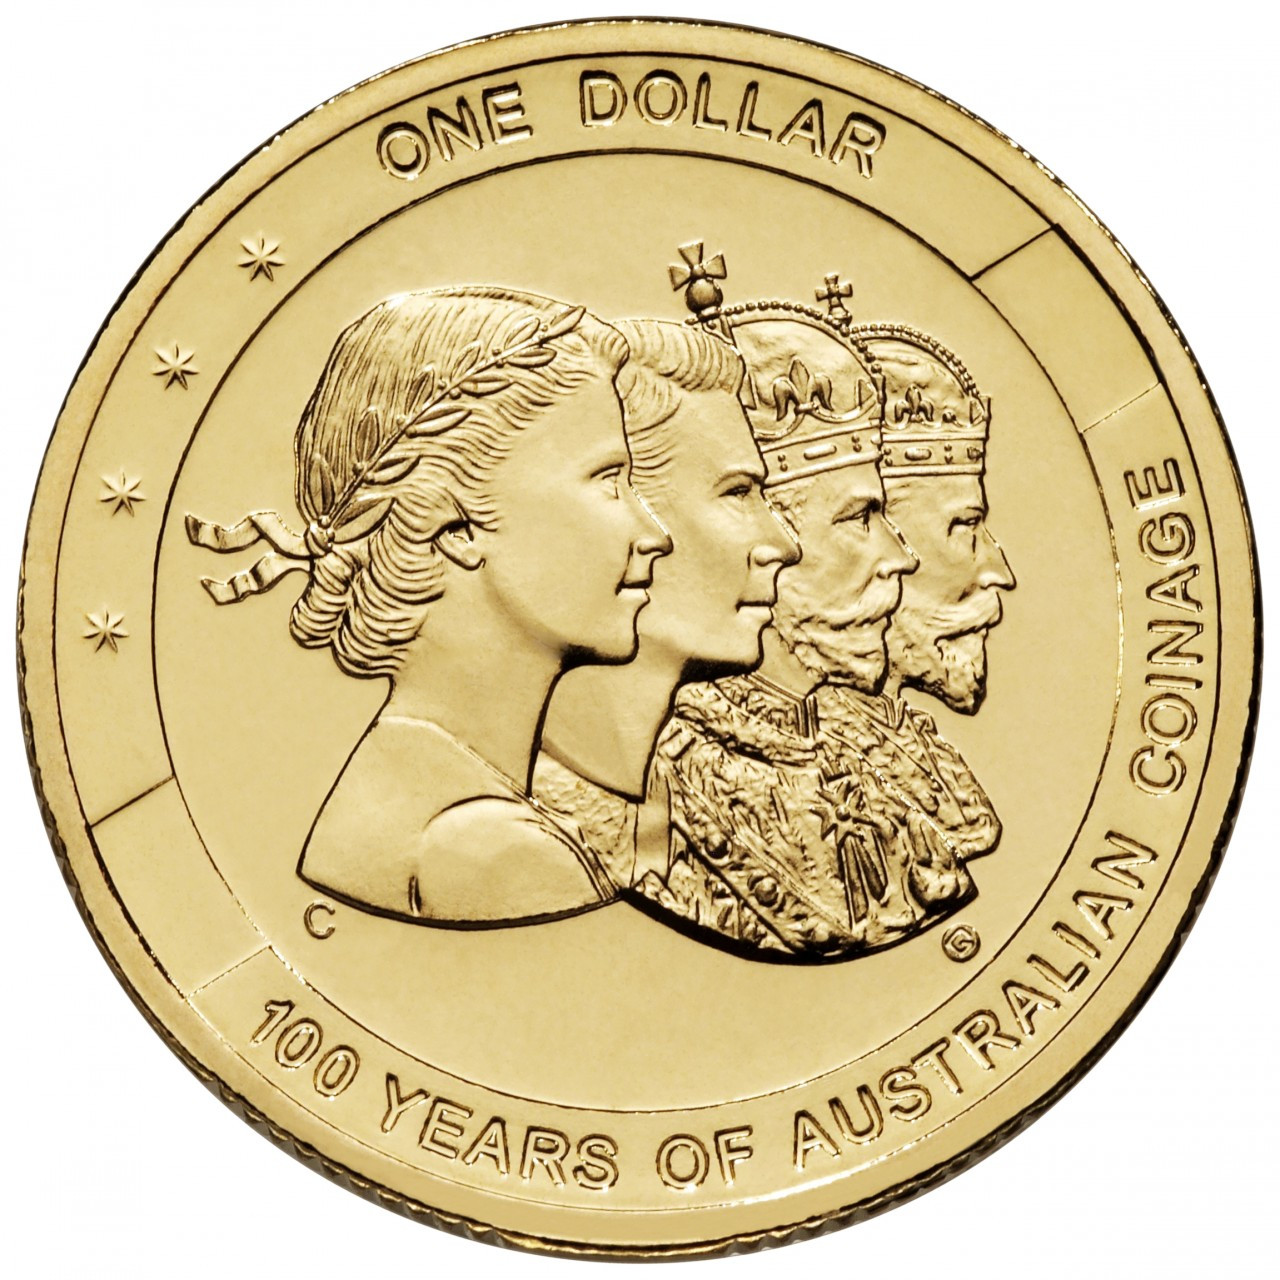 2010  Commonwealth Coinage with $1 coin PNC